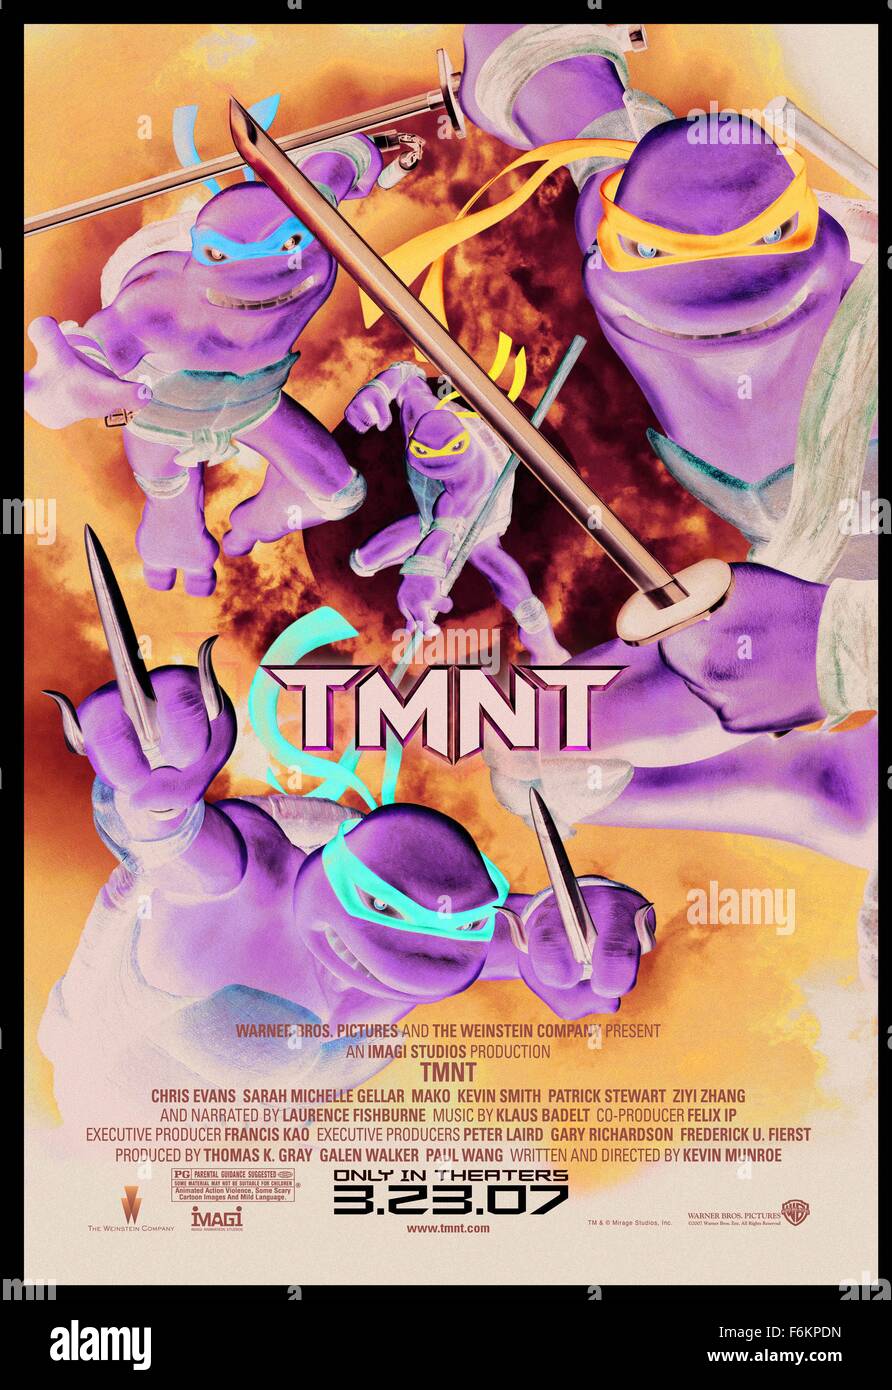 RELEASE DATE: March 23, 2007. MOVIE TITLE: TMNT. STUDIO: The Weinstein  Company. PLOT: Strange events are occurring in New York City, and the  Turtles are needed more than ever, but Raphael, Donatello,